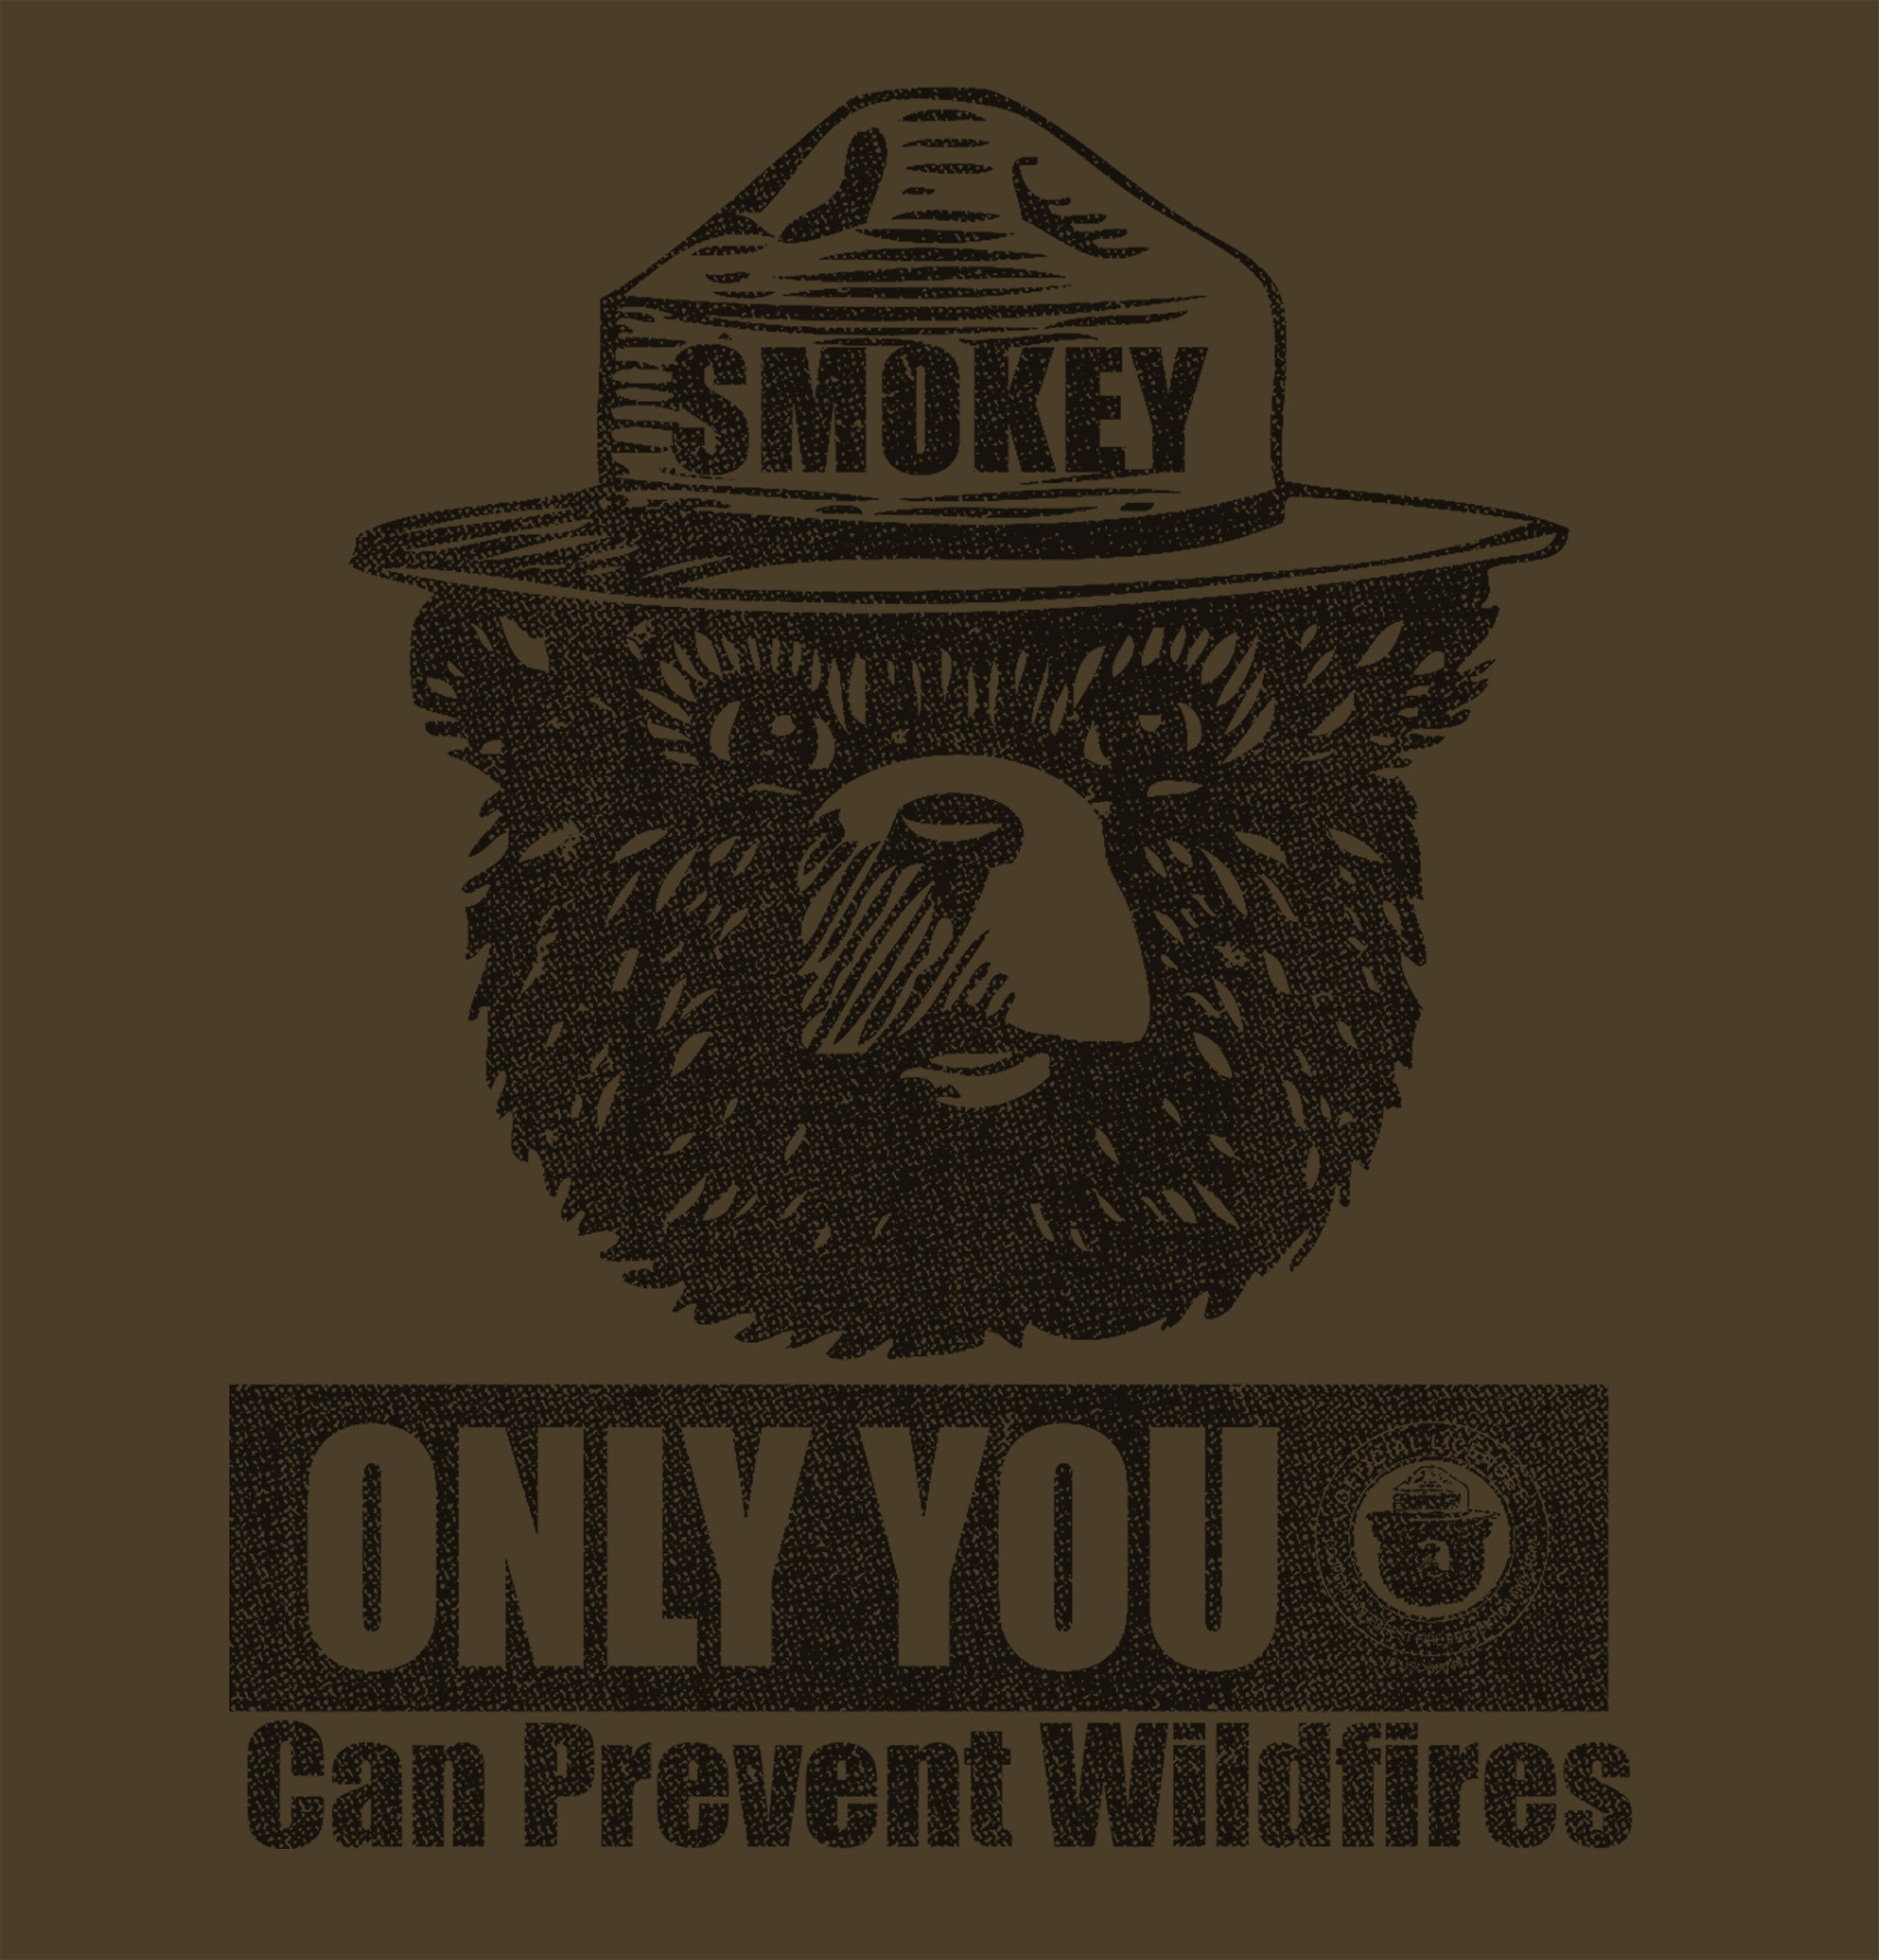 Smokey Bear Only You Can Prevent Wildfires Vintage Graphic T-Shirt - Brown